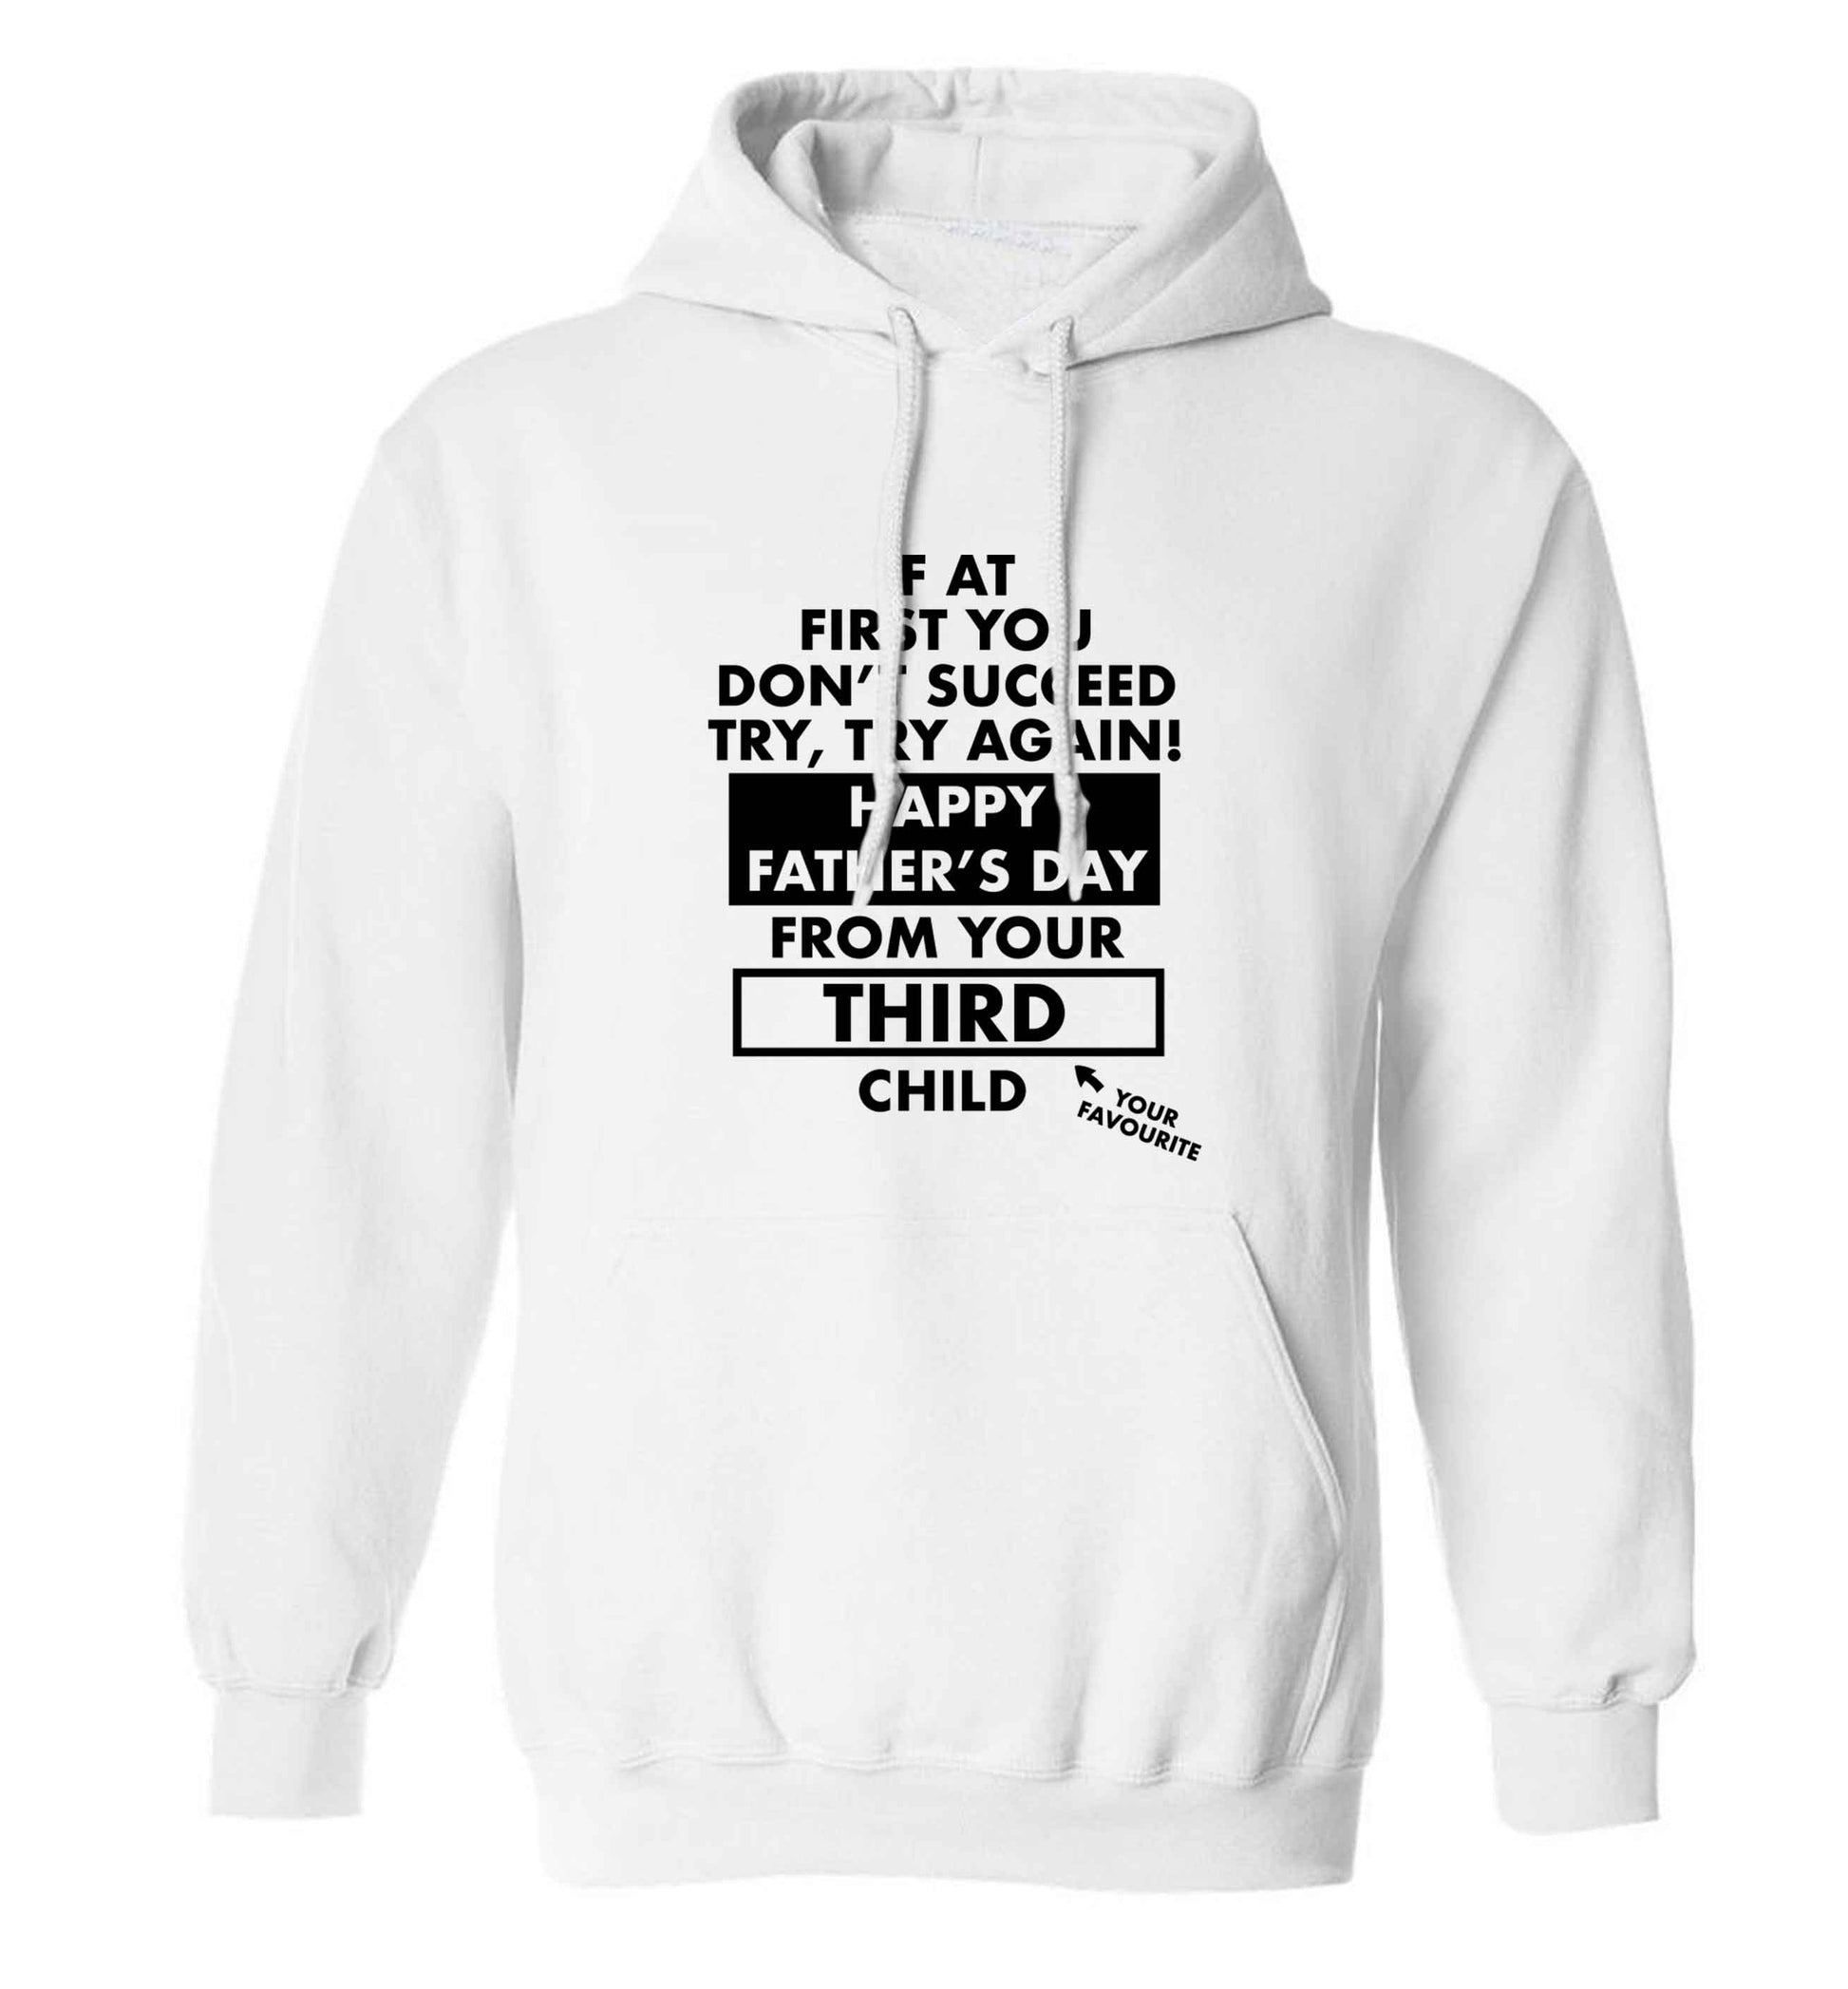 If at first you don't succeed try, try again Happy Father's day from your third child! adults unisex white hoodie 2XL